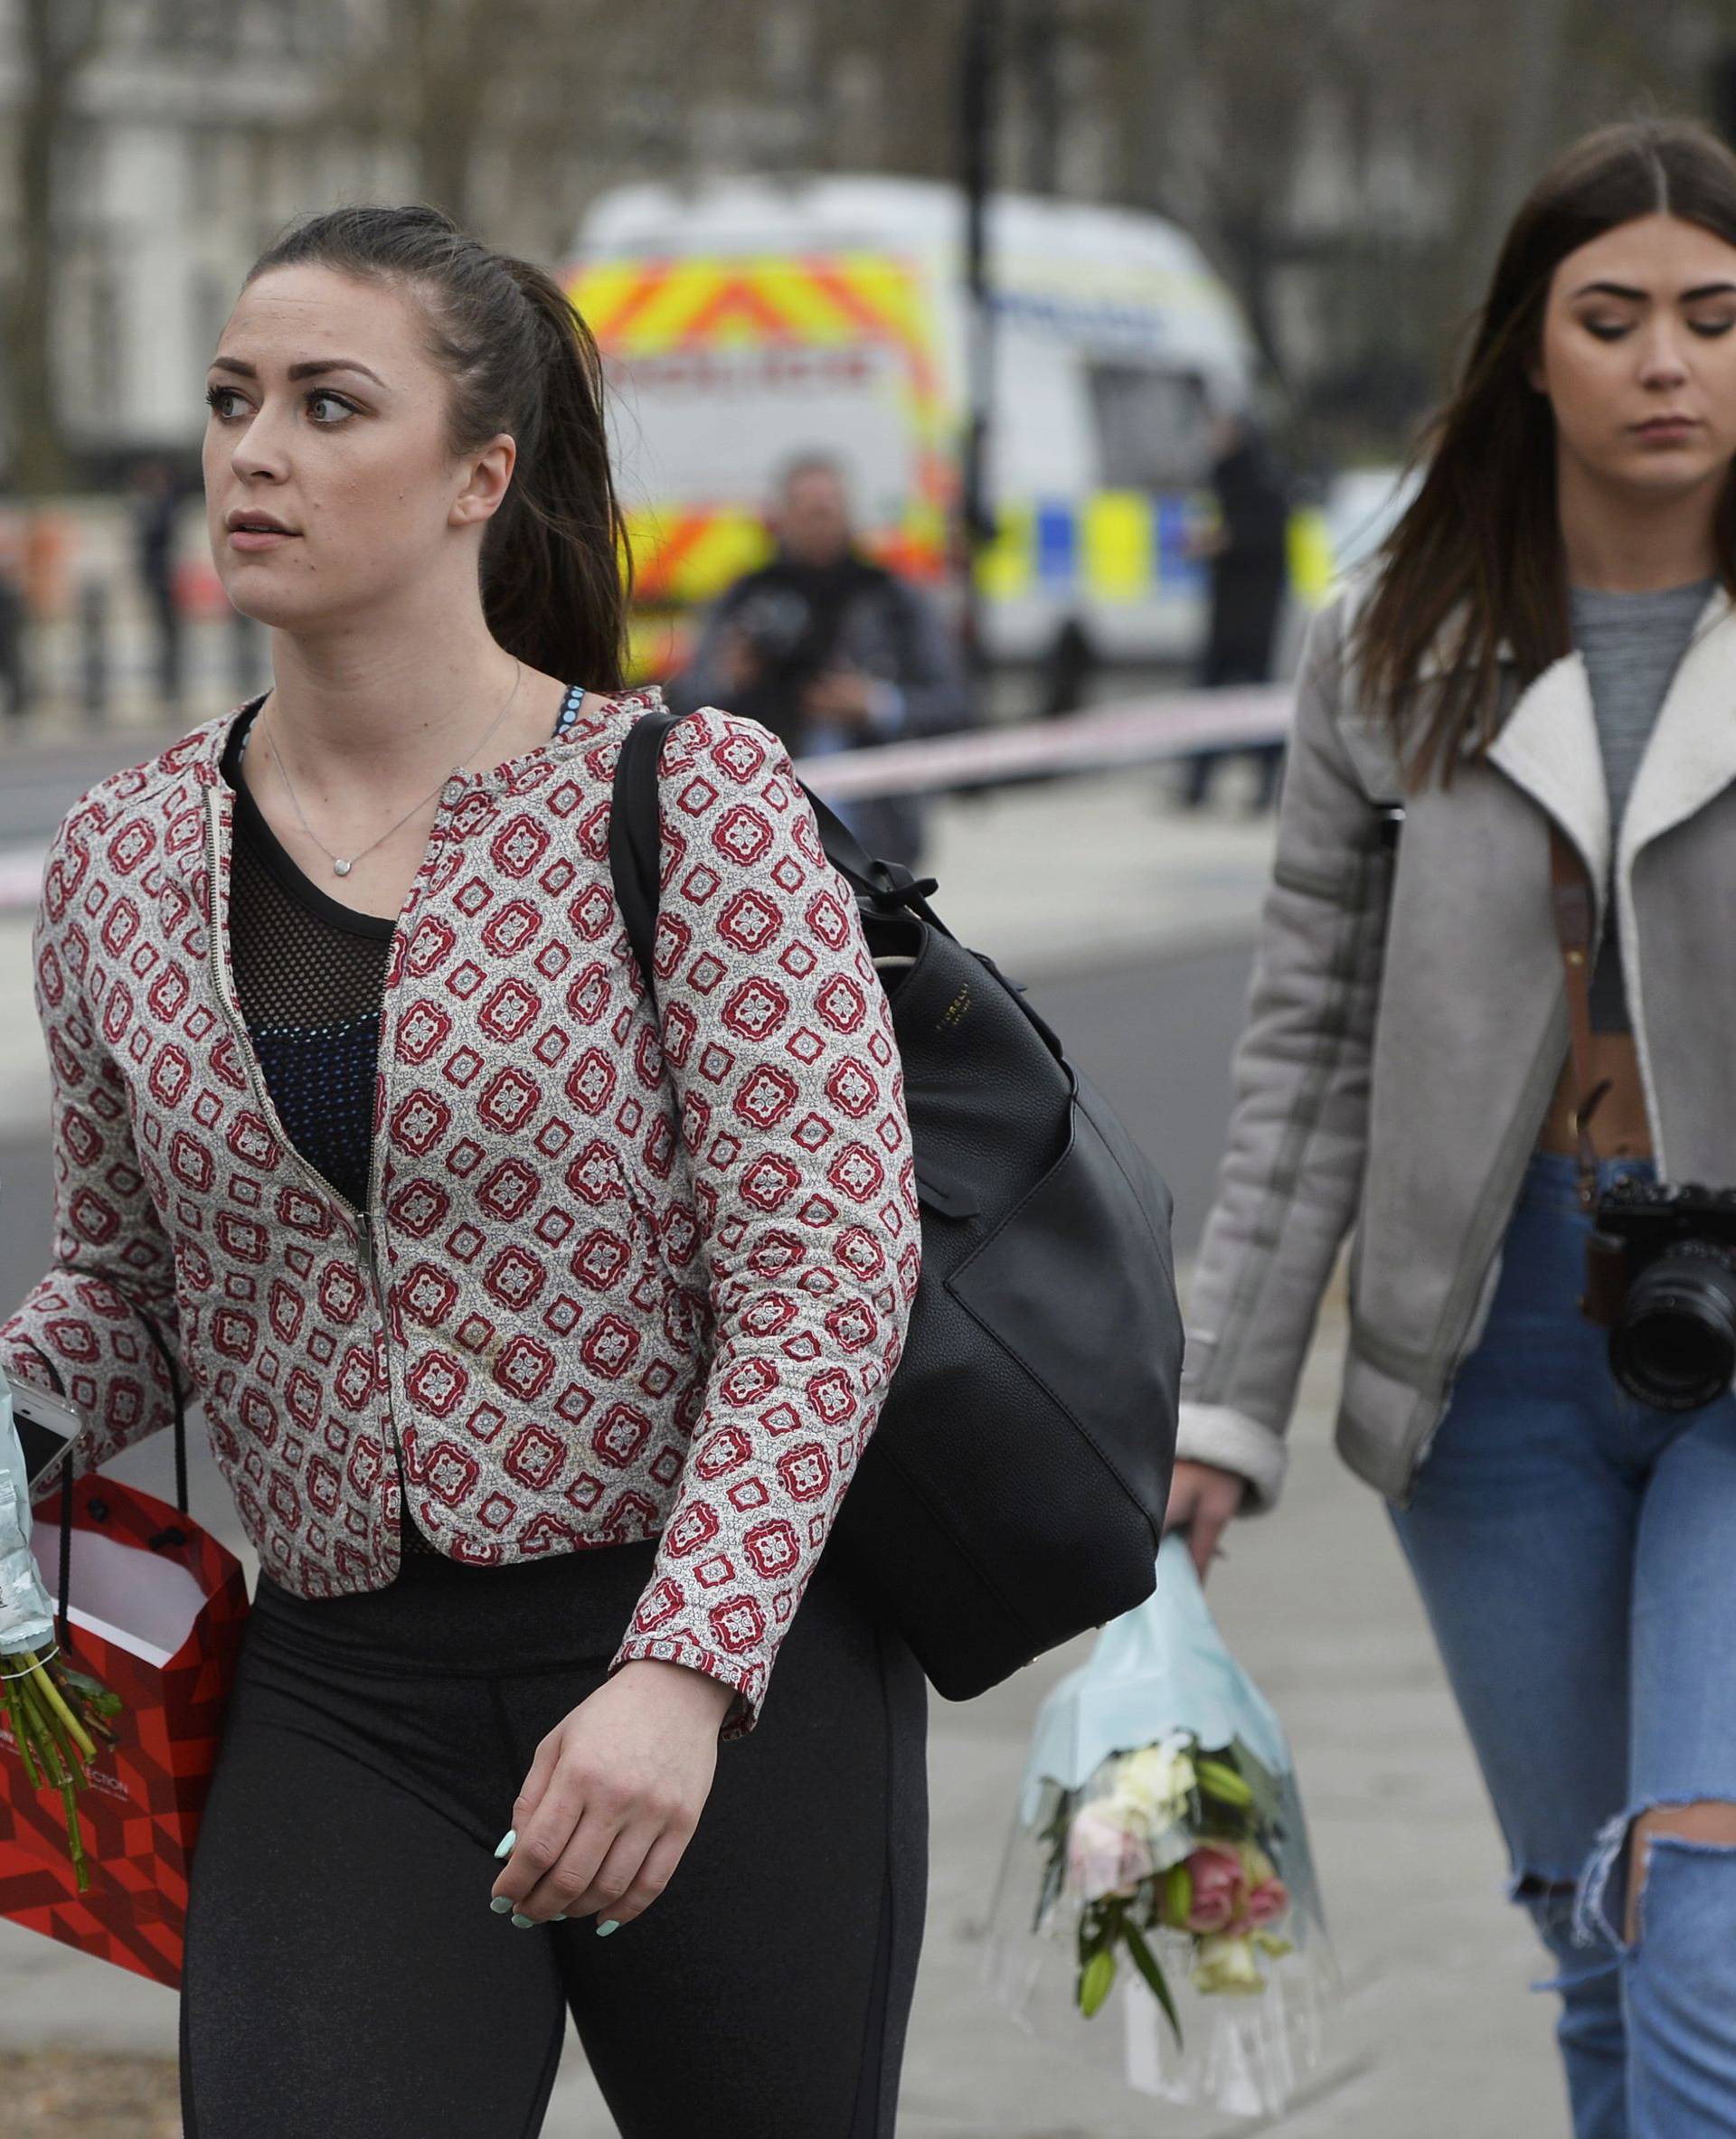 Two women carry flowers as they walk alongside the police cordon the morning after an attack in London